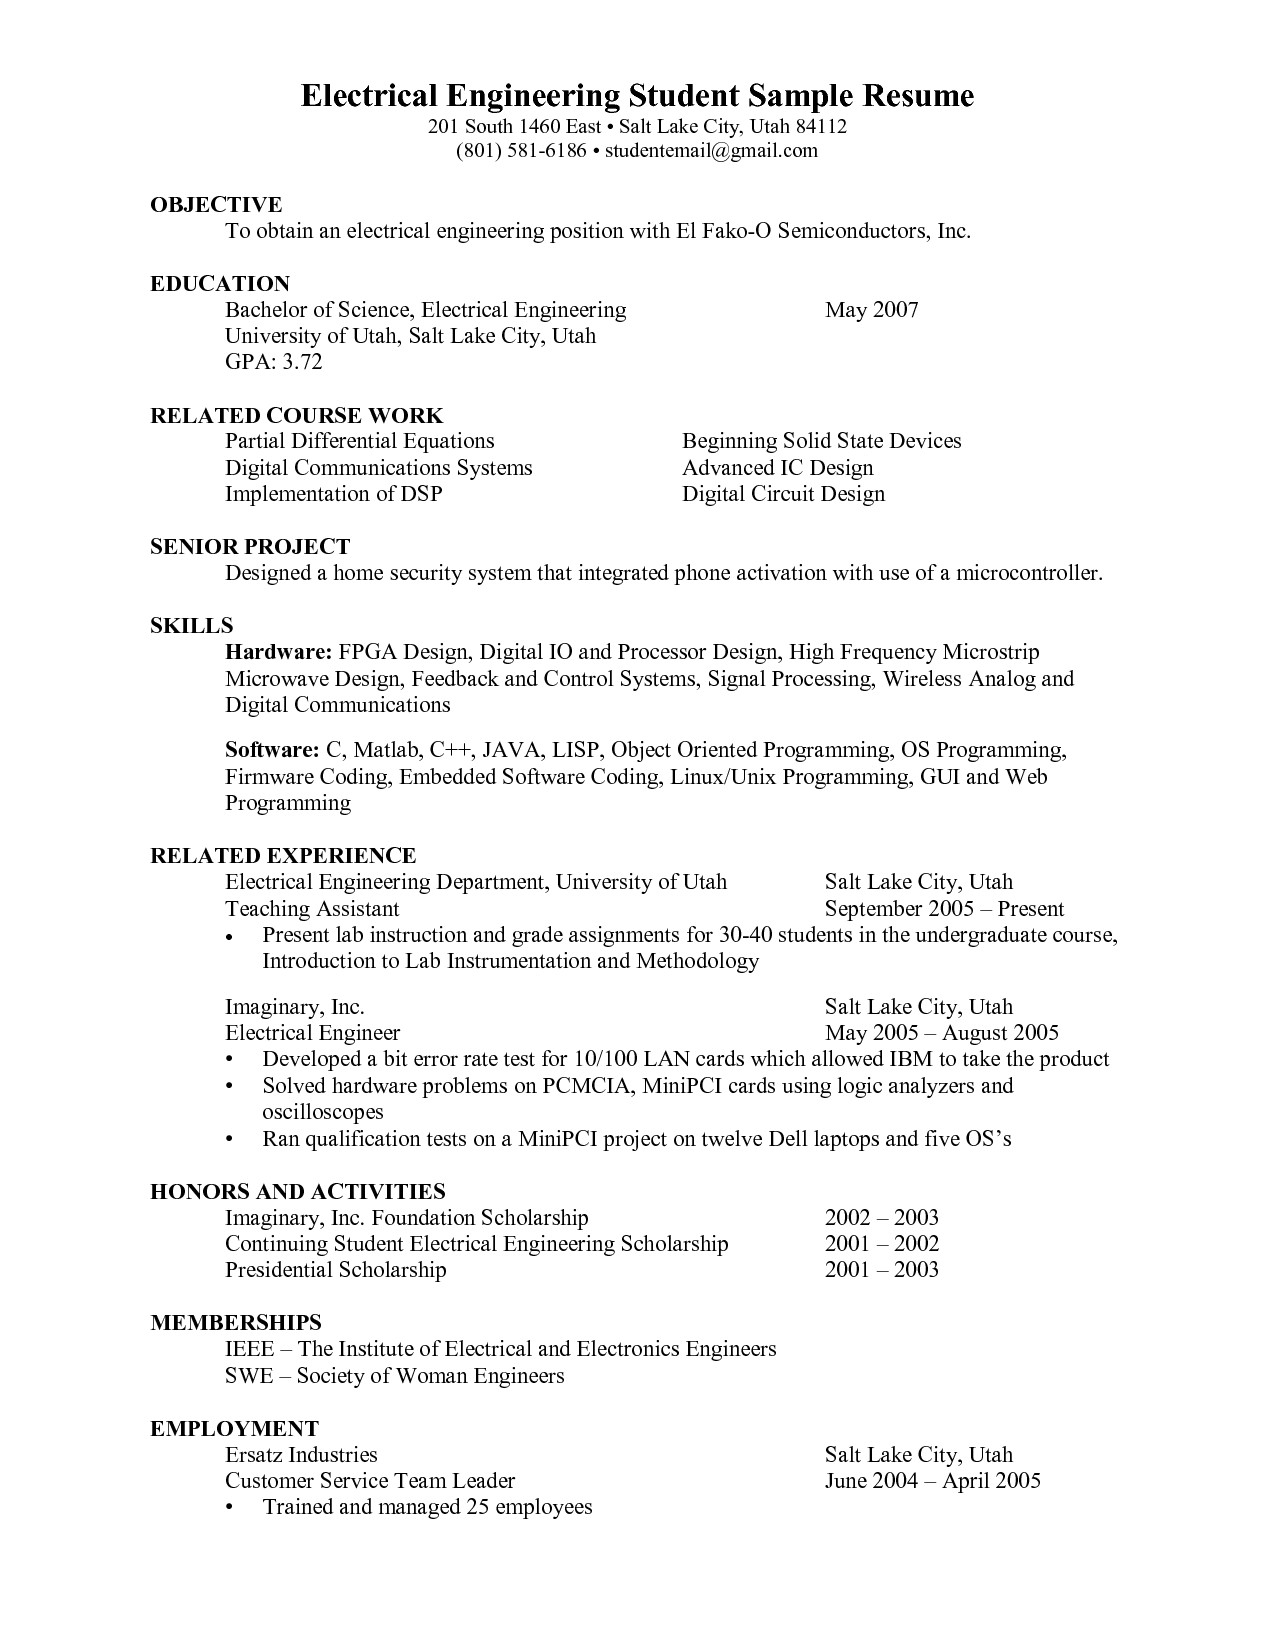 Sample Resume for Electrical Engineering Student Electrical Engineering Student Resume